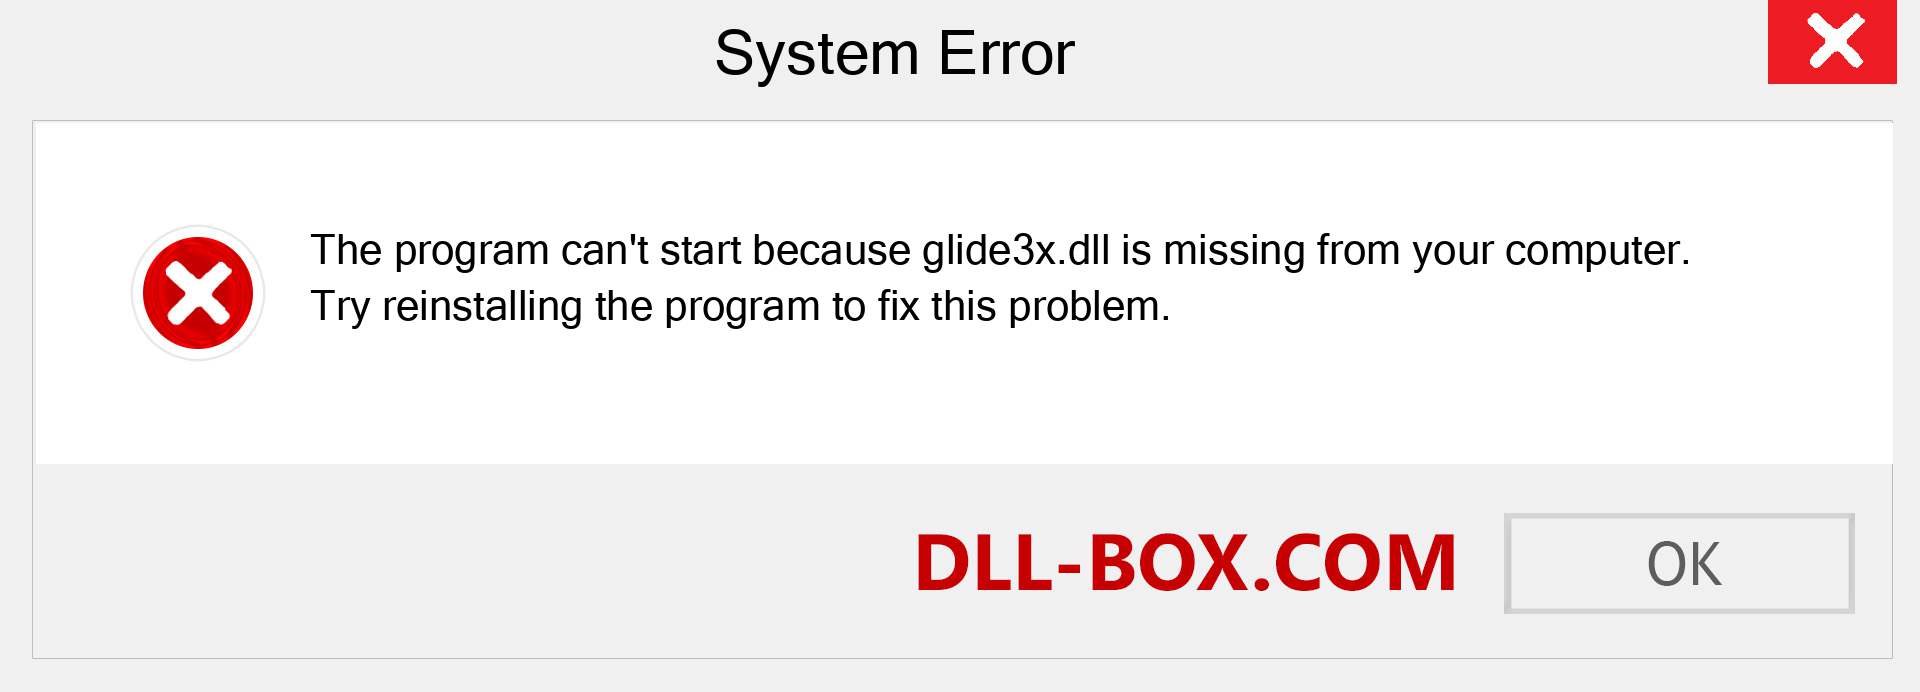  glide3x.dll file is missing?. Download for Windows 7, 8, 10 - Fix  glide3x dll Missing Error on Windows, photos, images